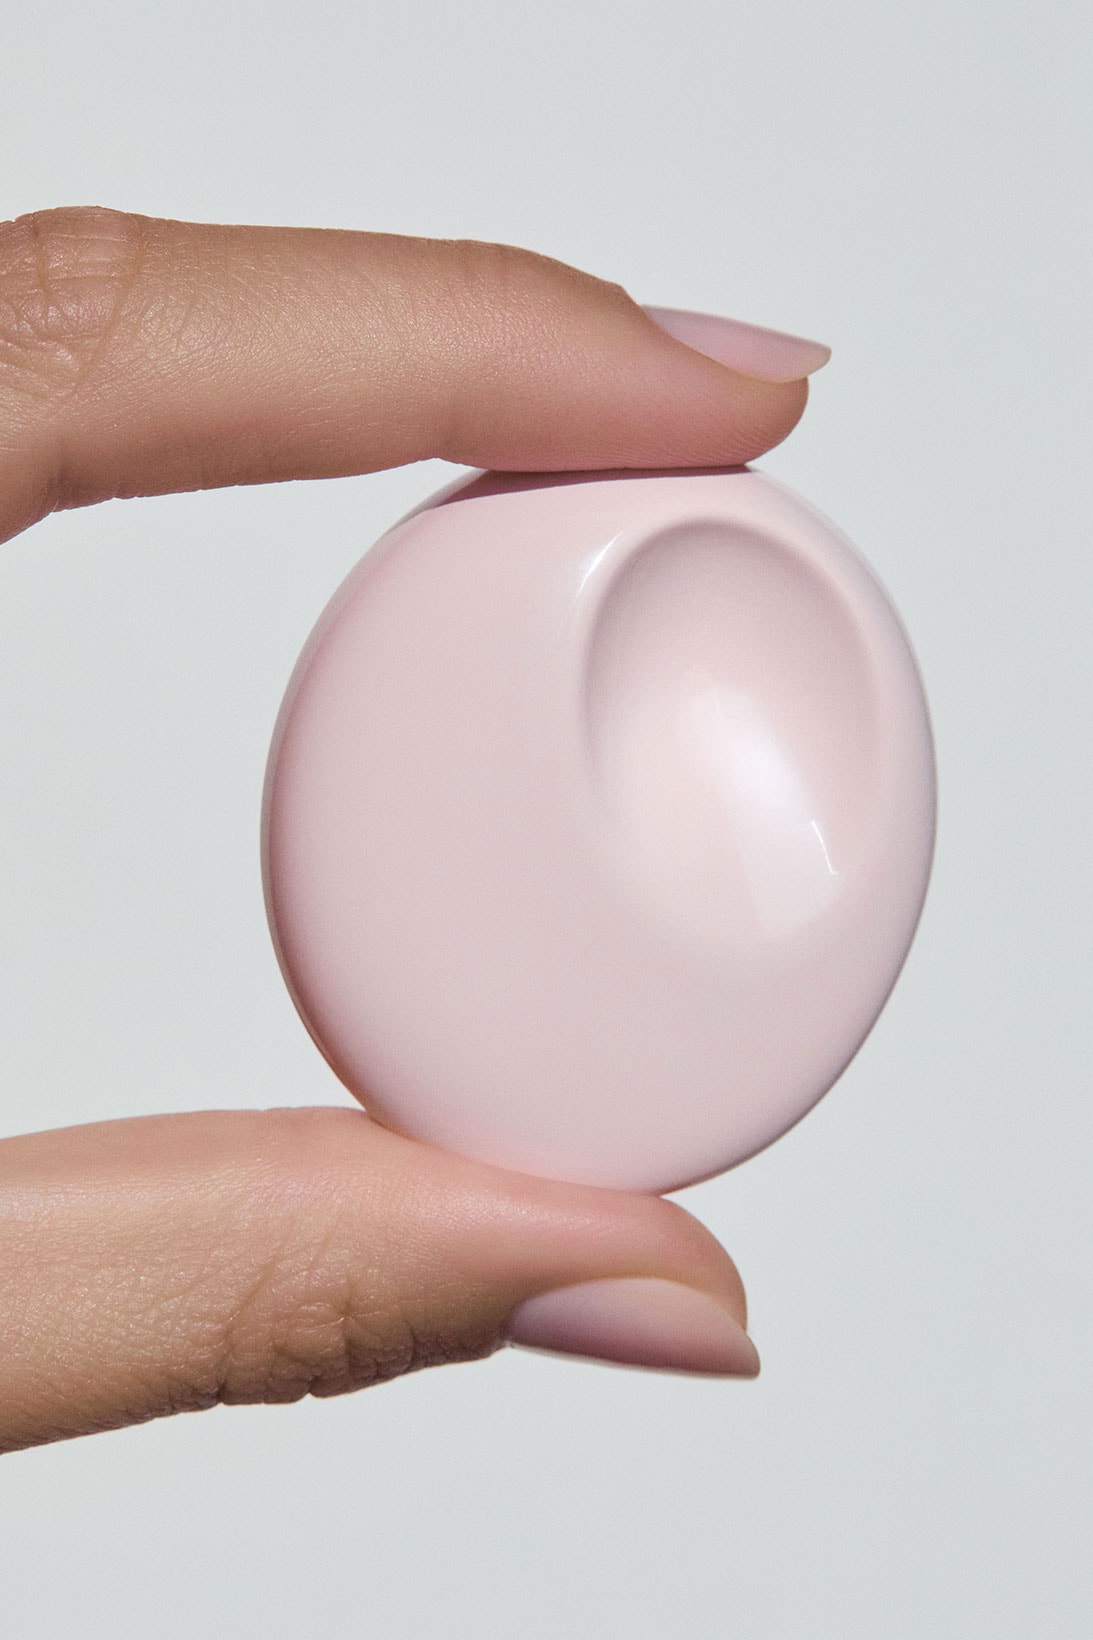 Glossier You Solid Perfume Fragrance Pink Balm